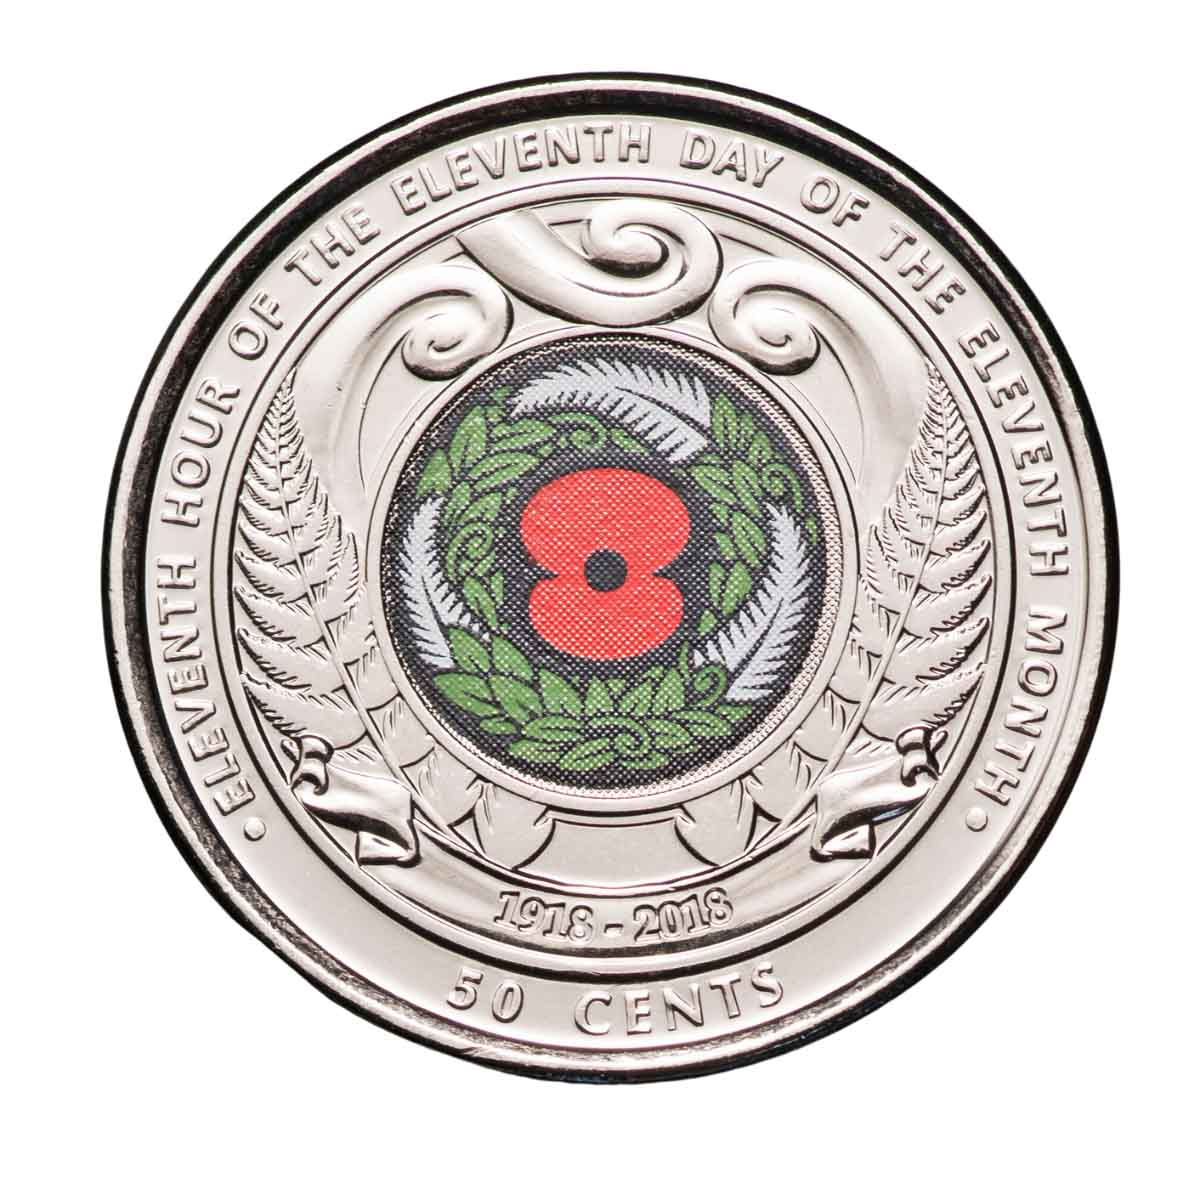 New Zealand 2018 50c Red Poppy Uncirculated Coin